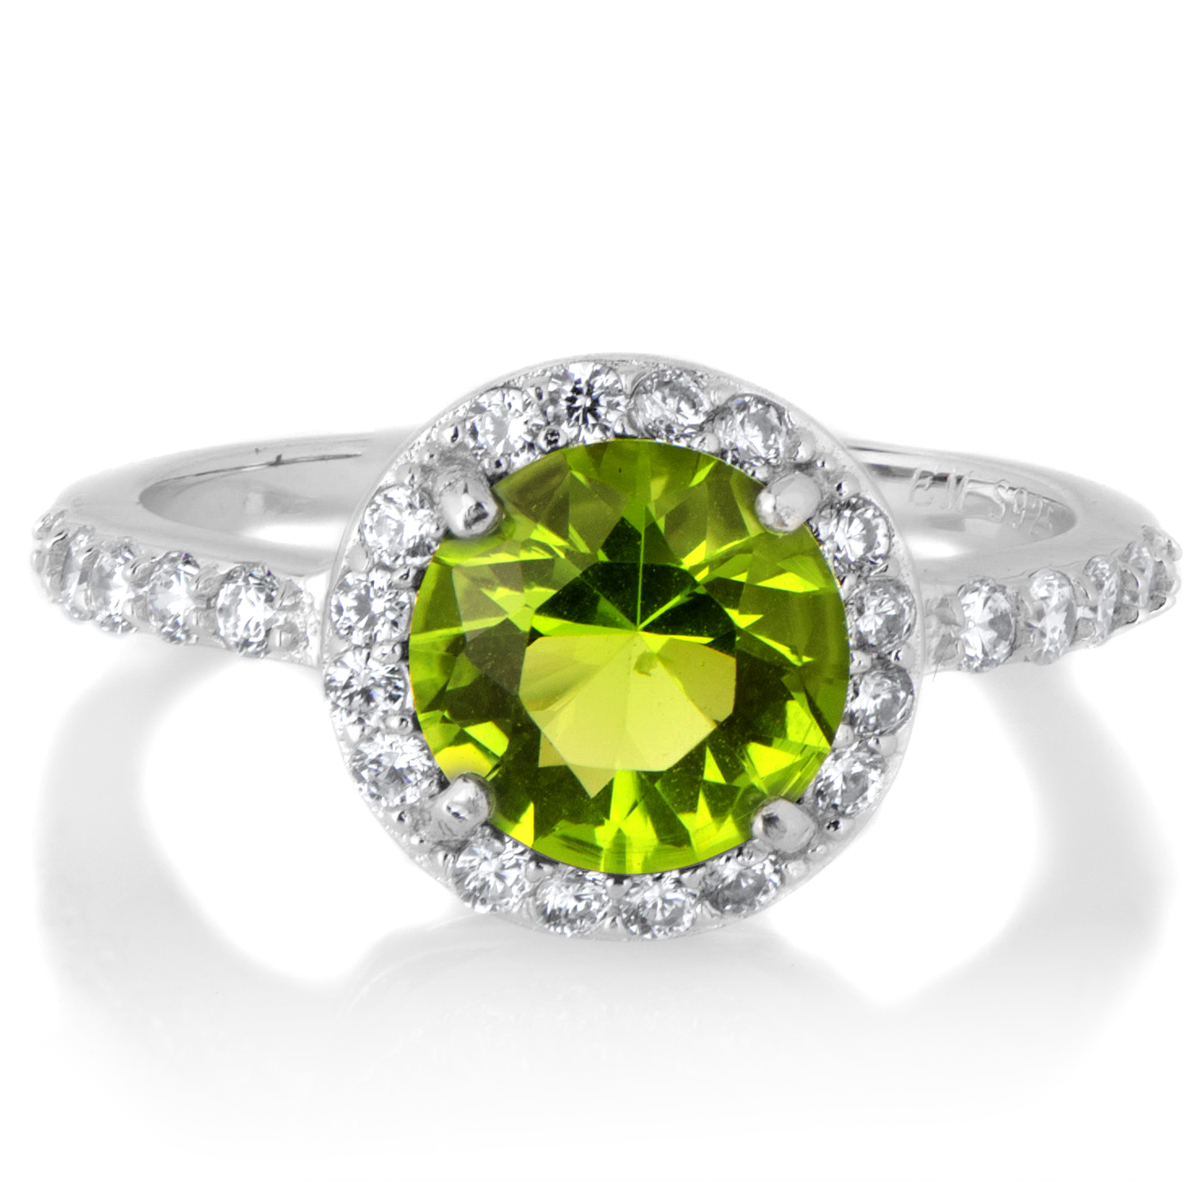 birthstone rings roll off image to close zoom window KPWOBKT